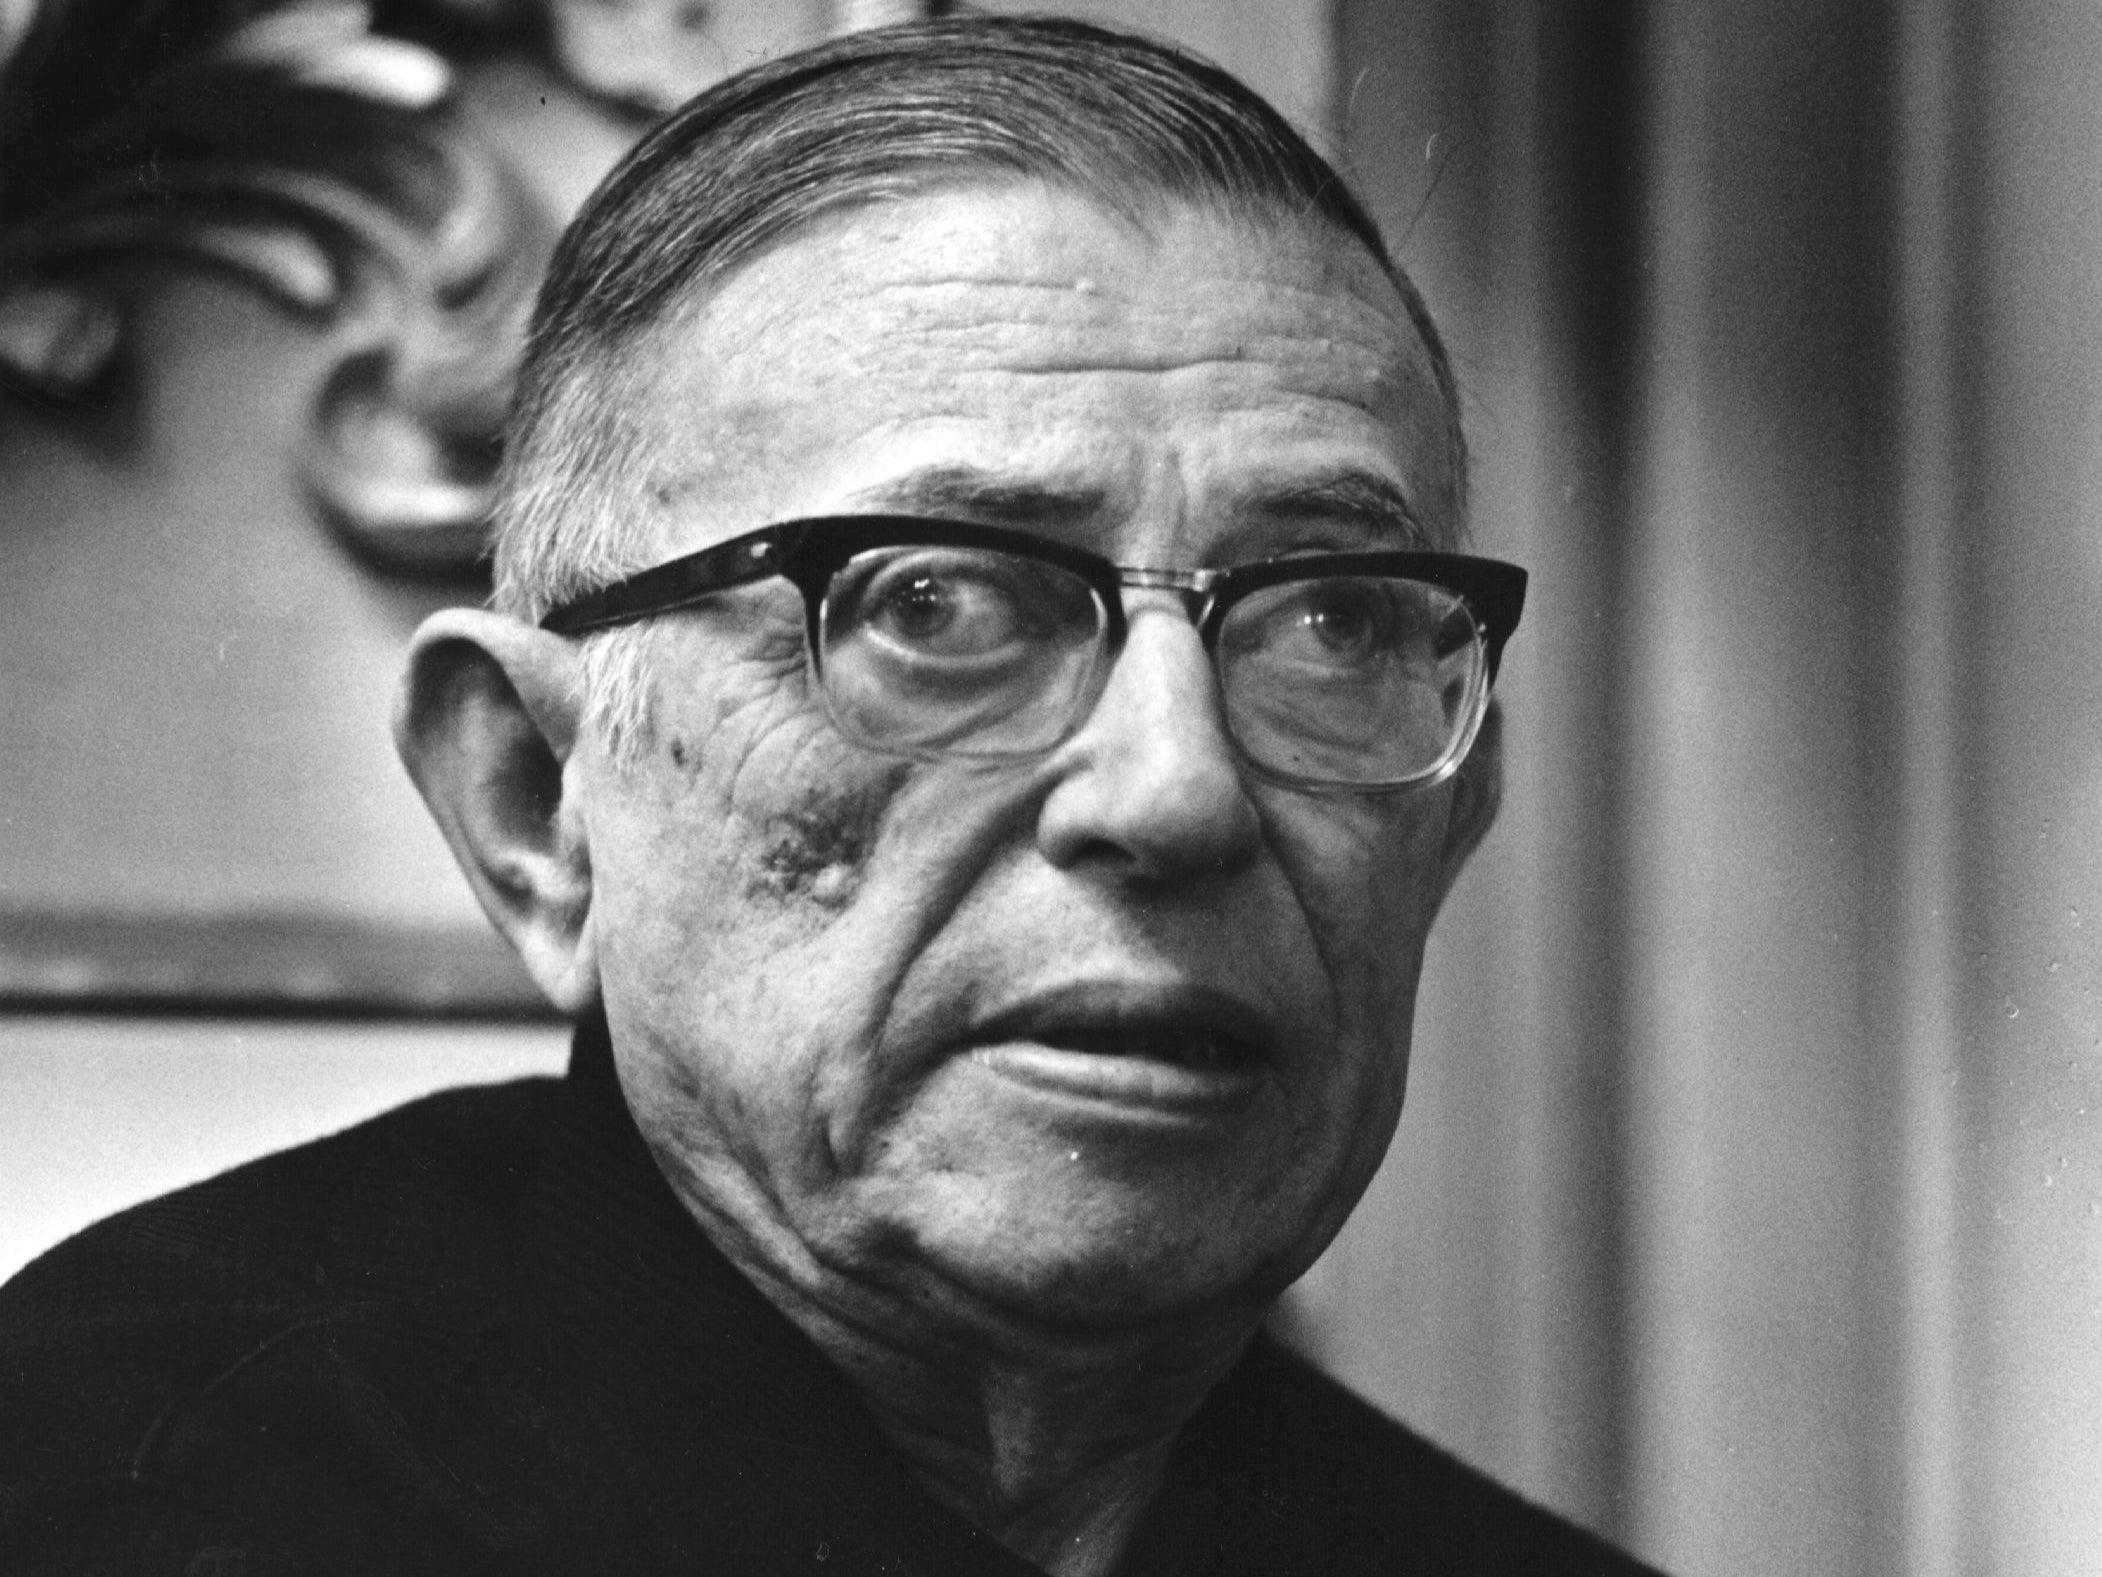 The image of the existentialist as a cafe-dwelling, chain-smoking, beret-wearing intellectual type comes largely from Sartre